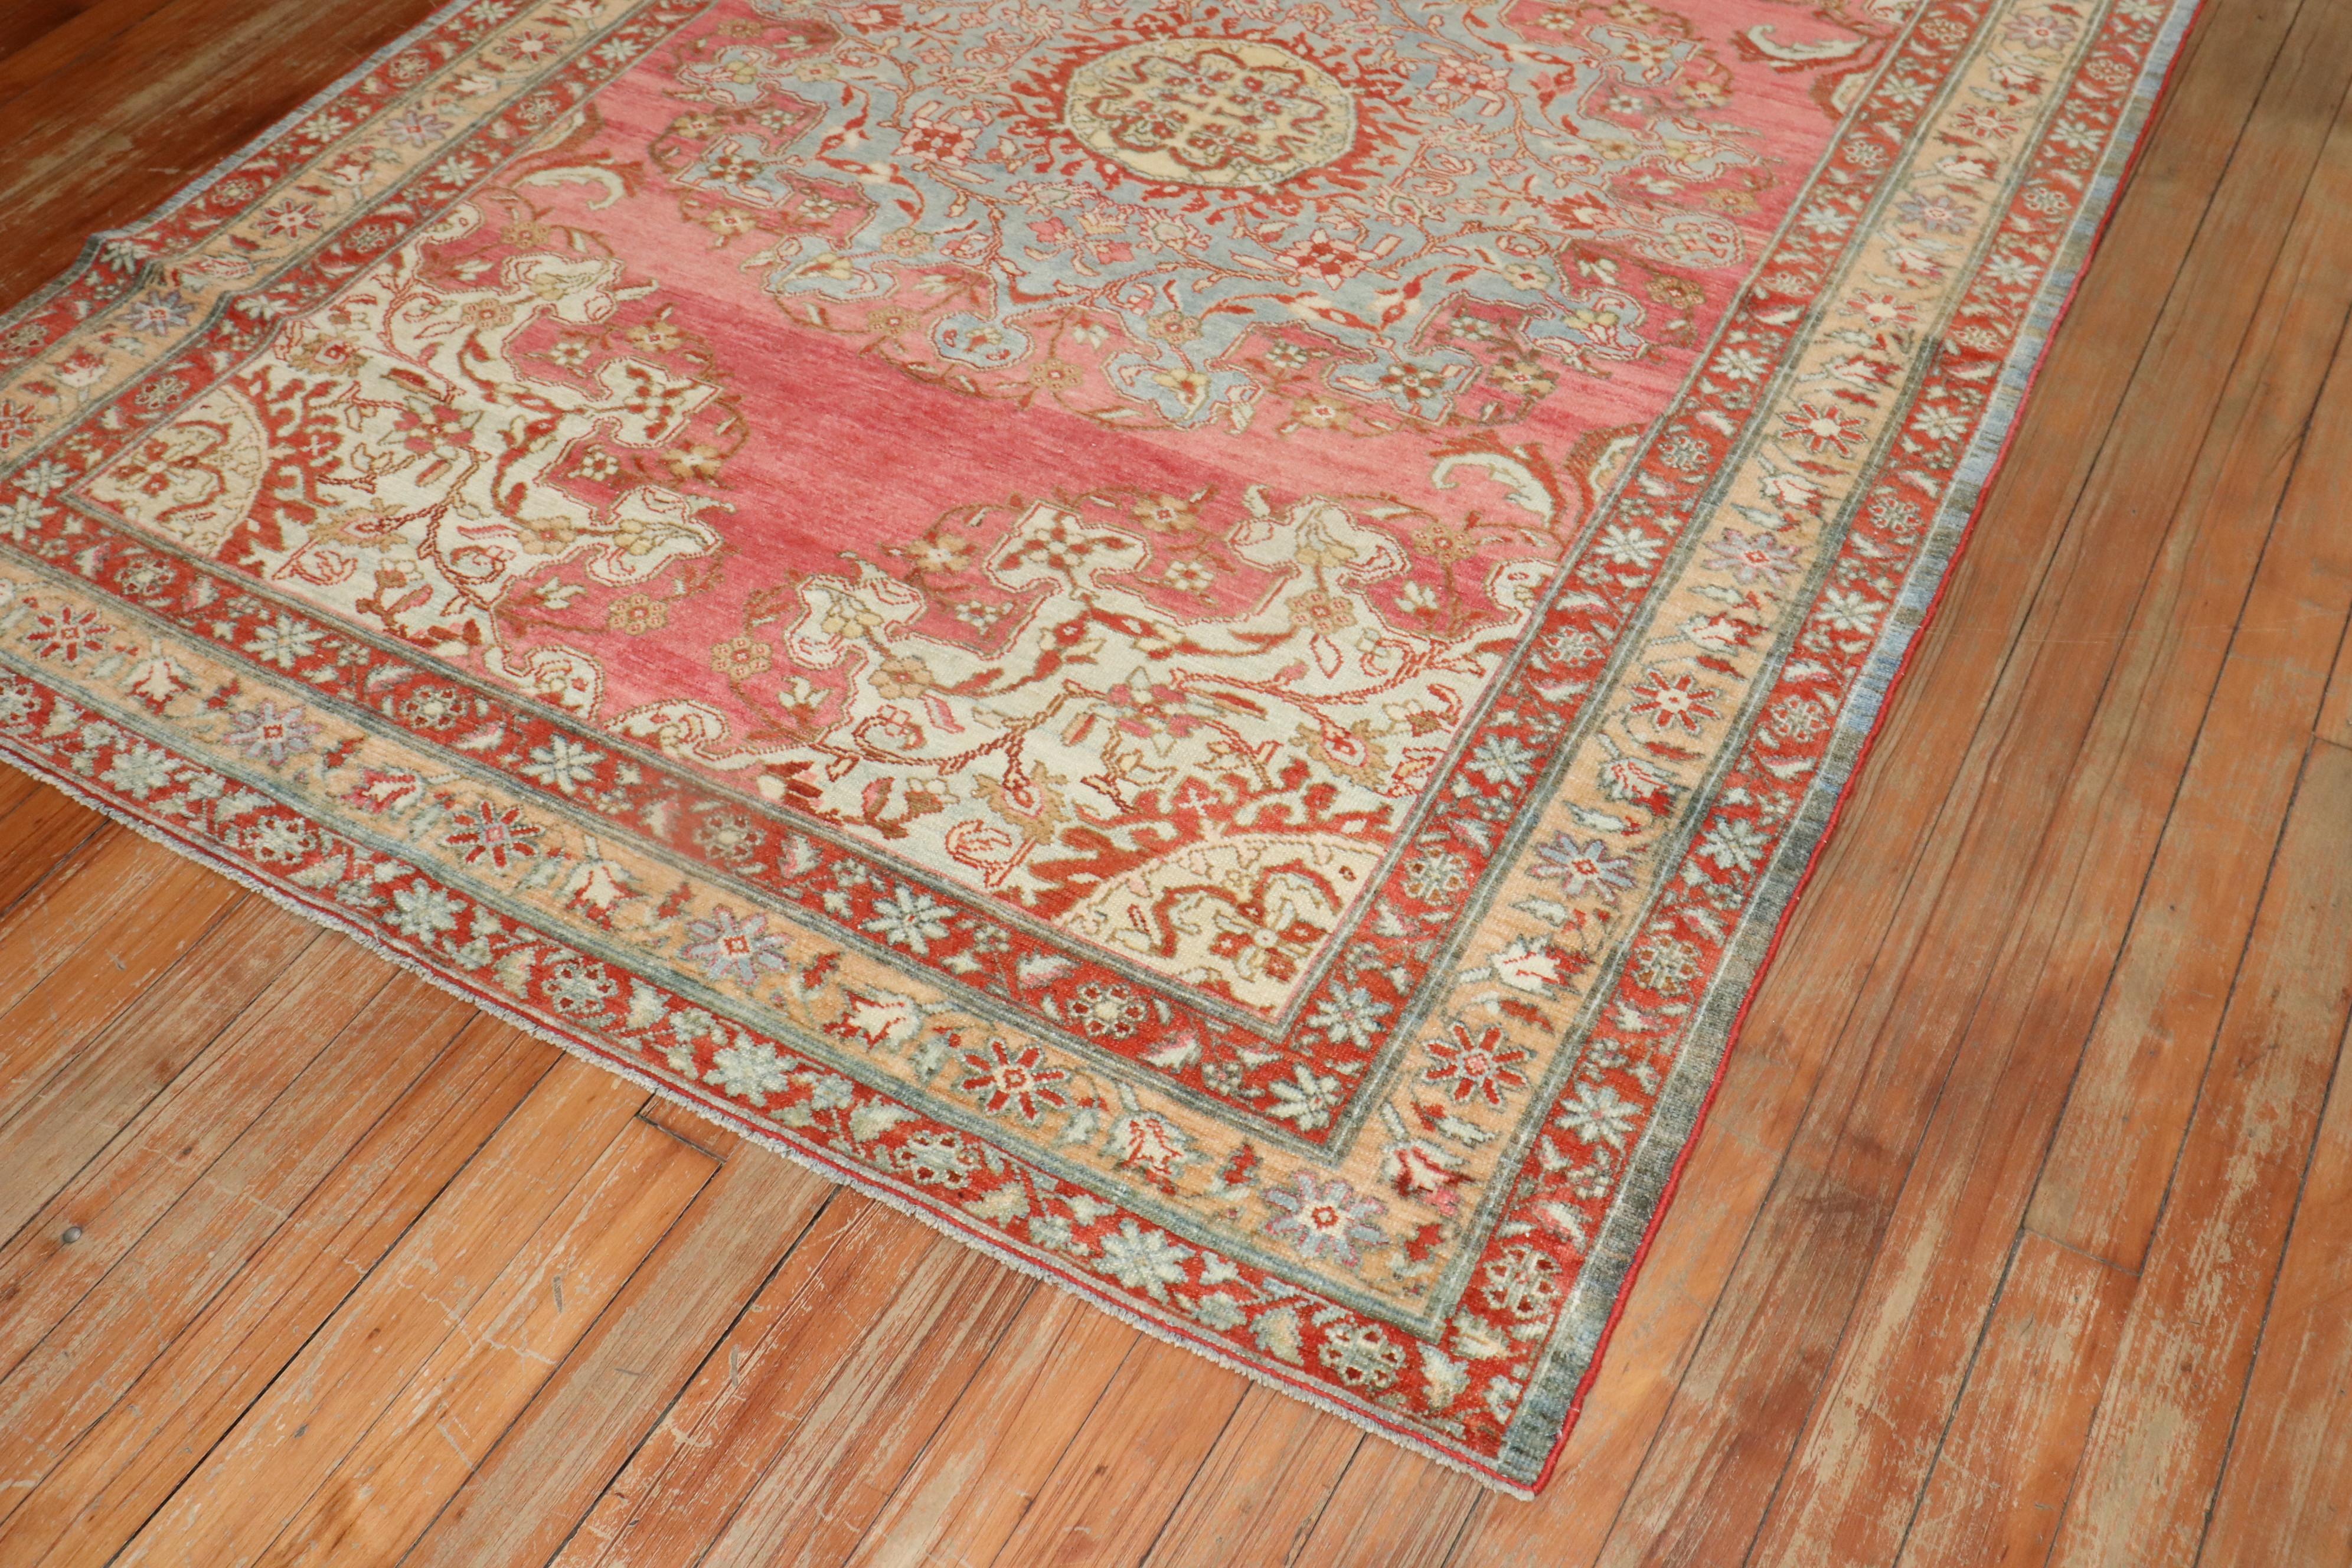 Antique Persian Tafresh rug from the 1st quarter of the 20th century.

Measures: 4'5'' x 6'2''

The single weft carpets are woven in Tafresh and its surrounding villages are of rather good quality. Instead of big carpets and runners, the weavers